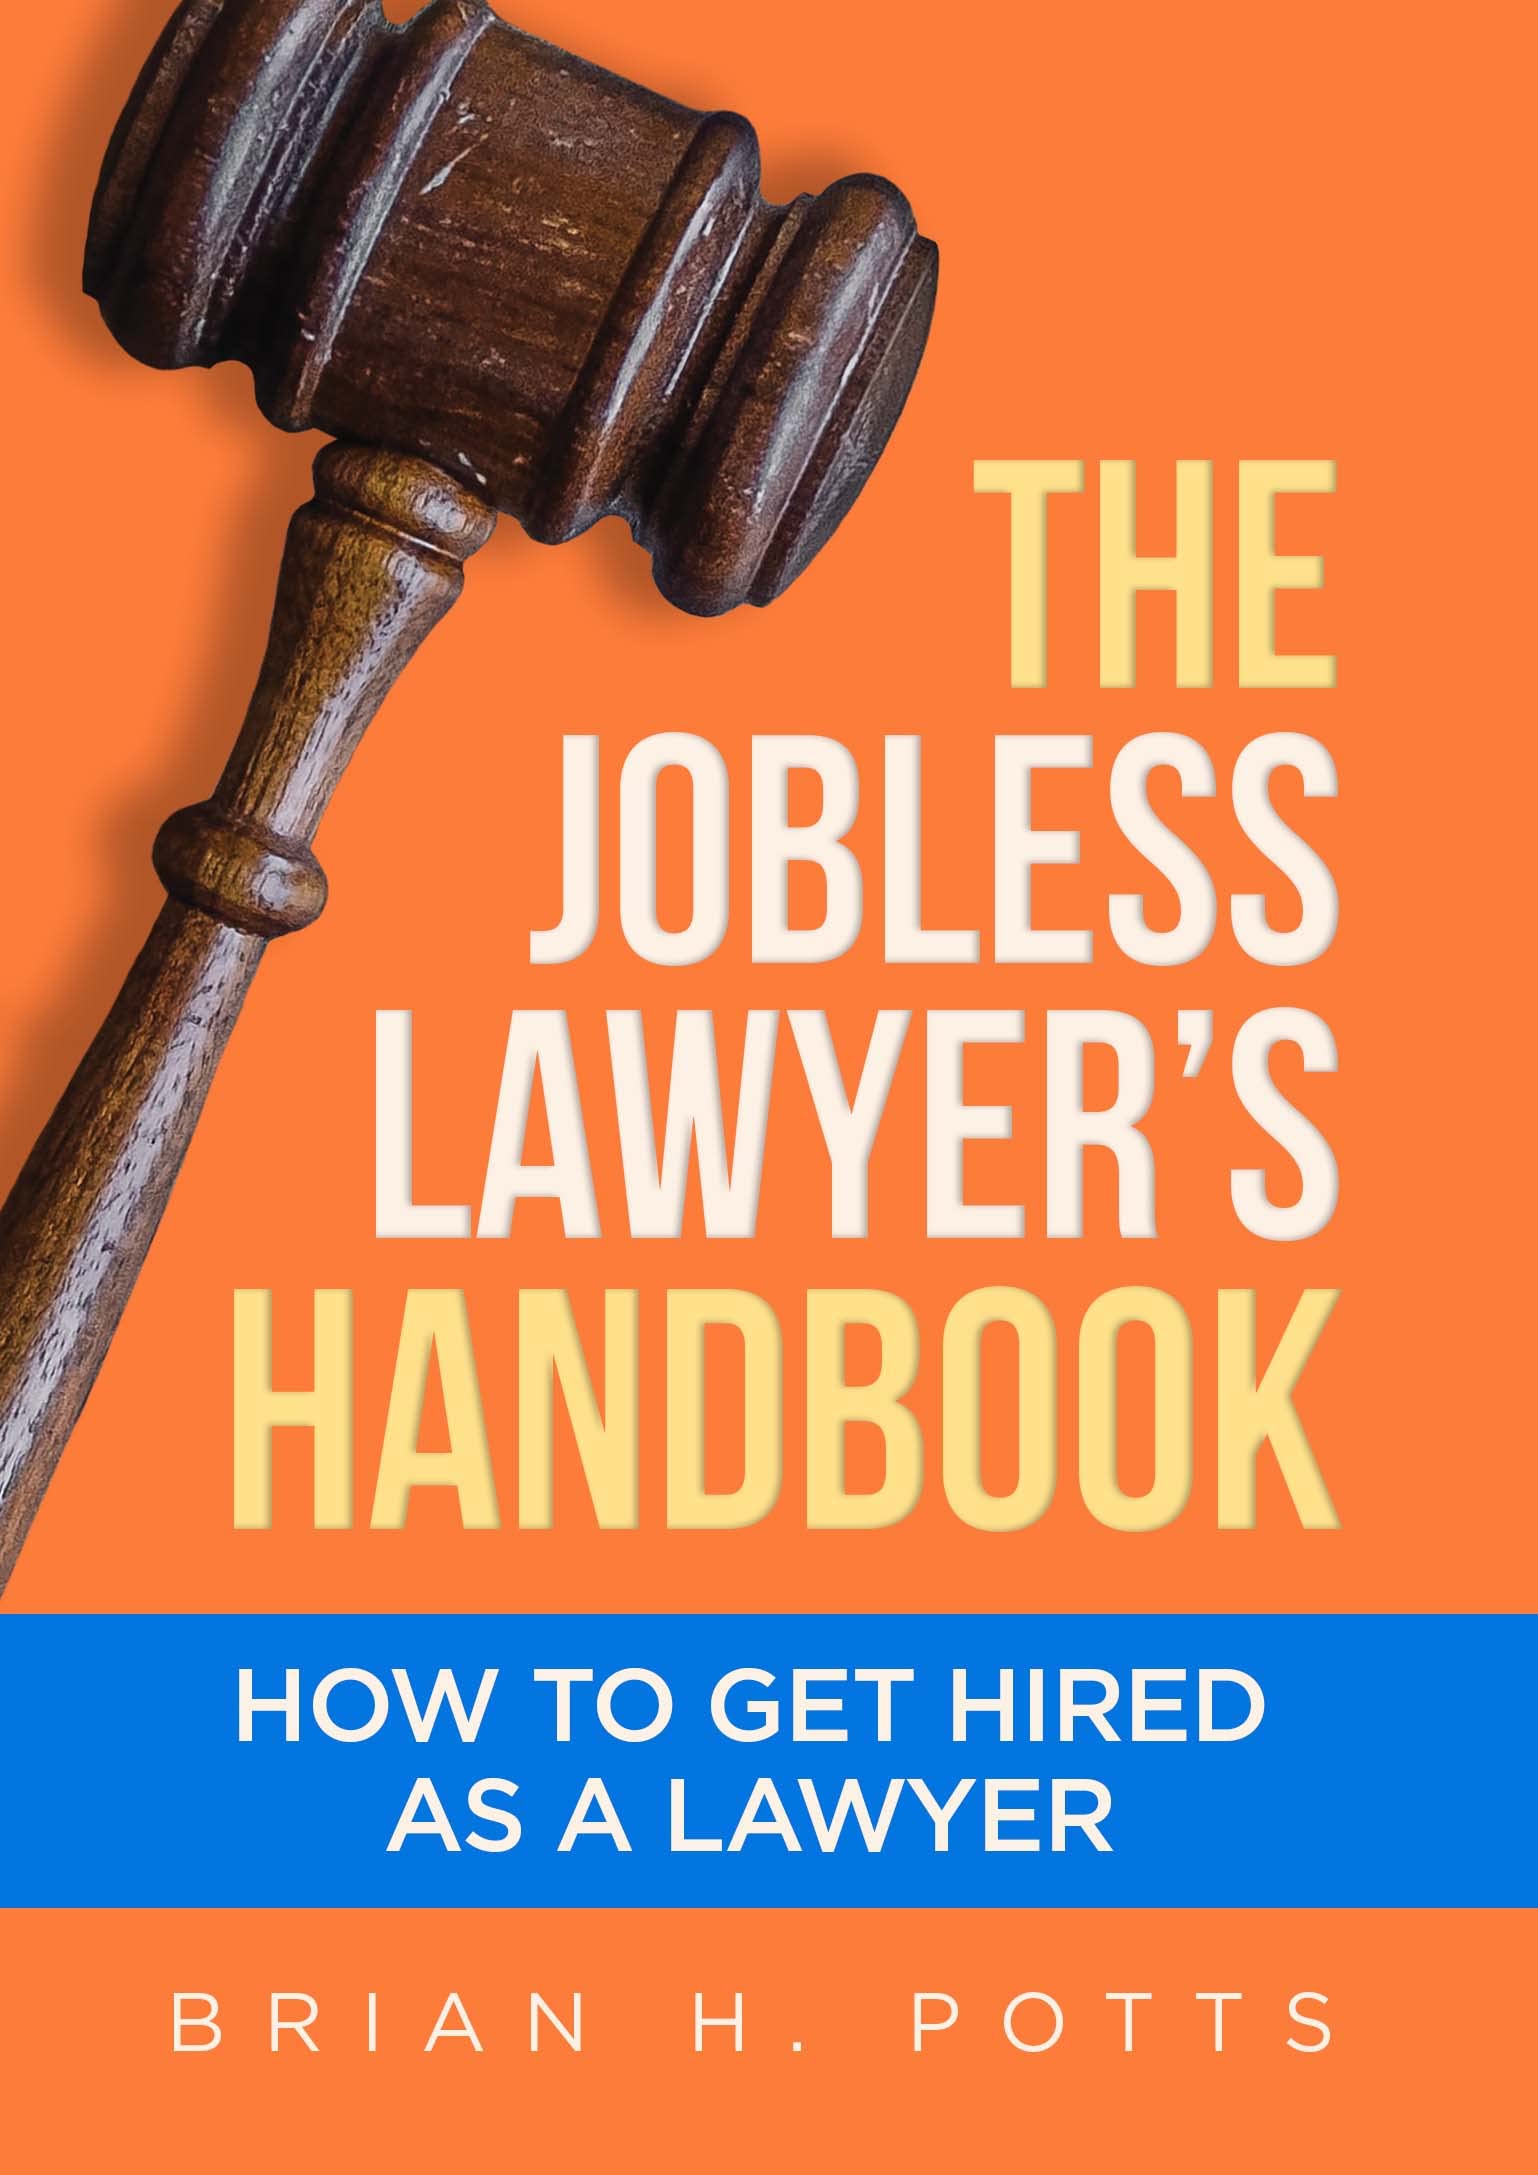 The Jobless Lawyer's Handbook: How to Get Hired as a Lawyer